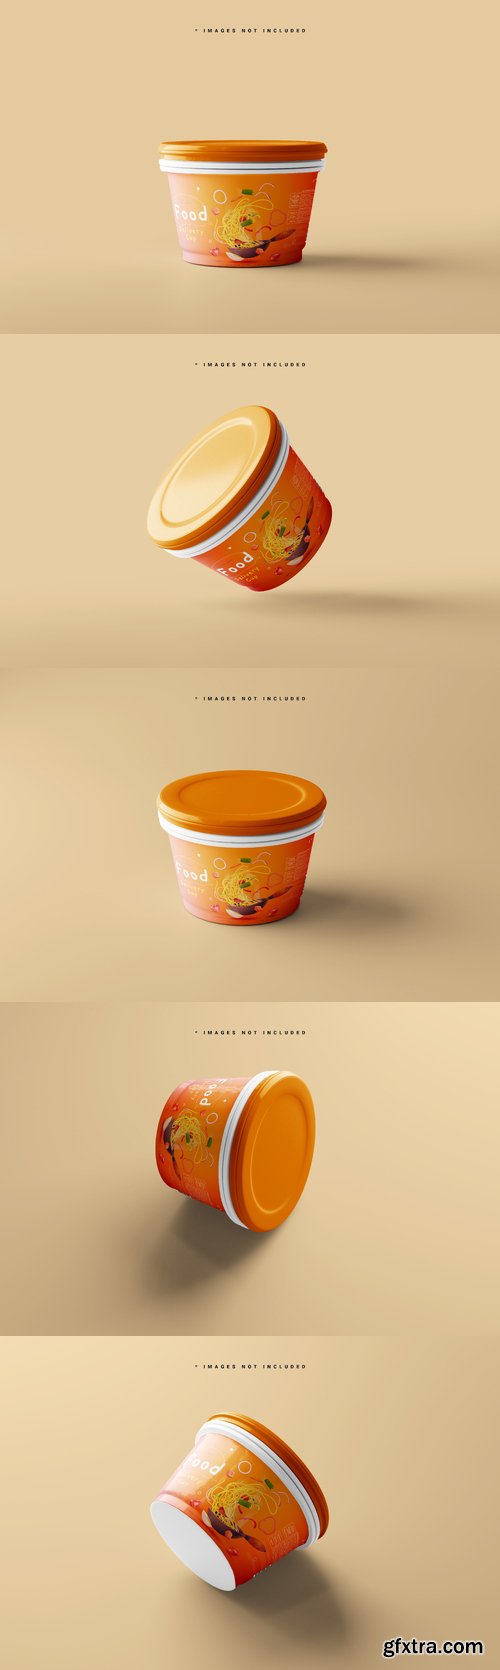 Food delivery cup mockups